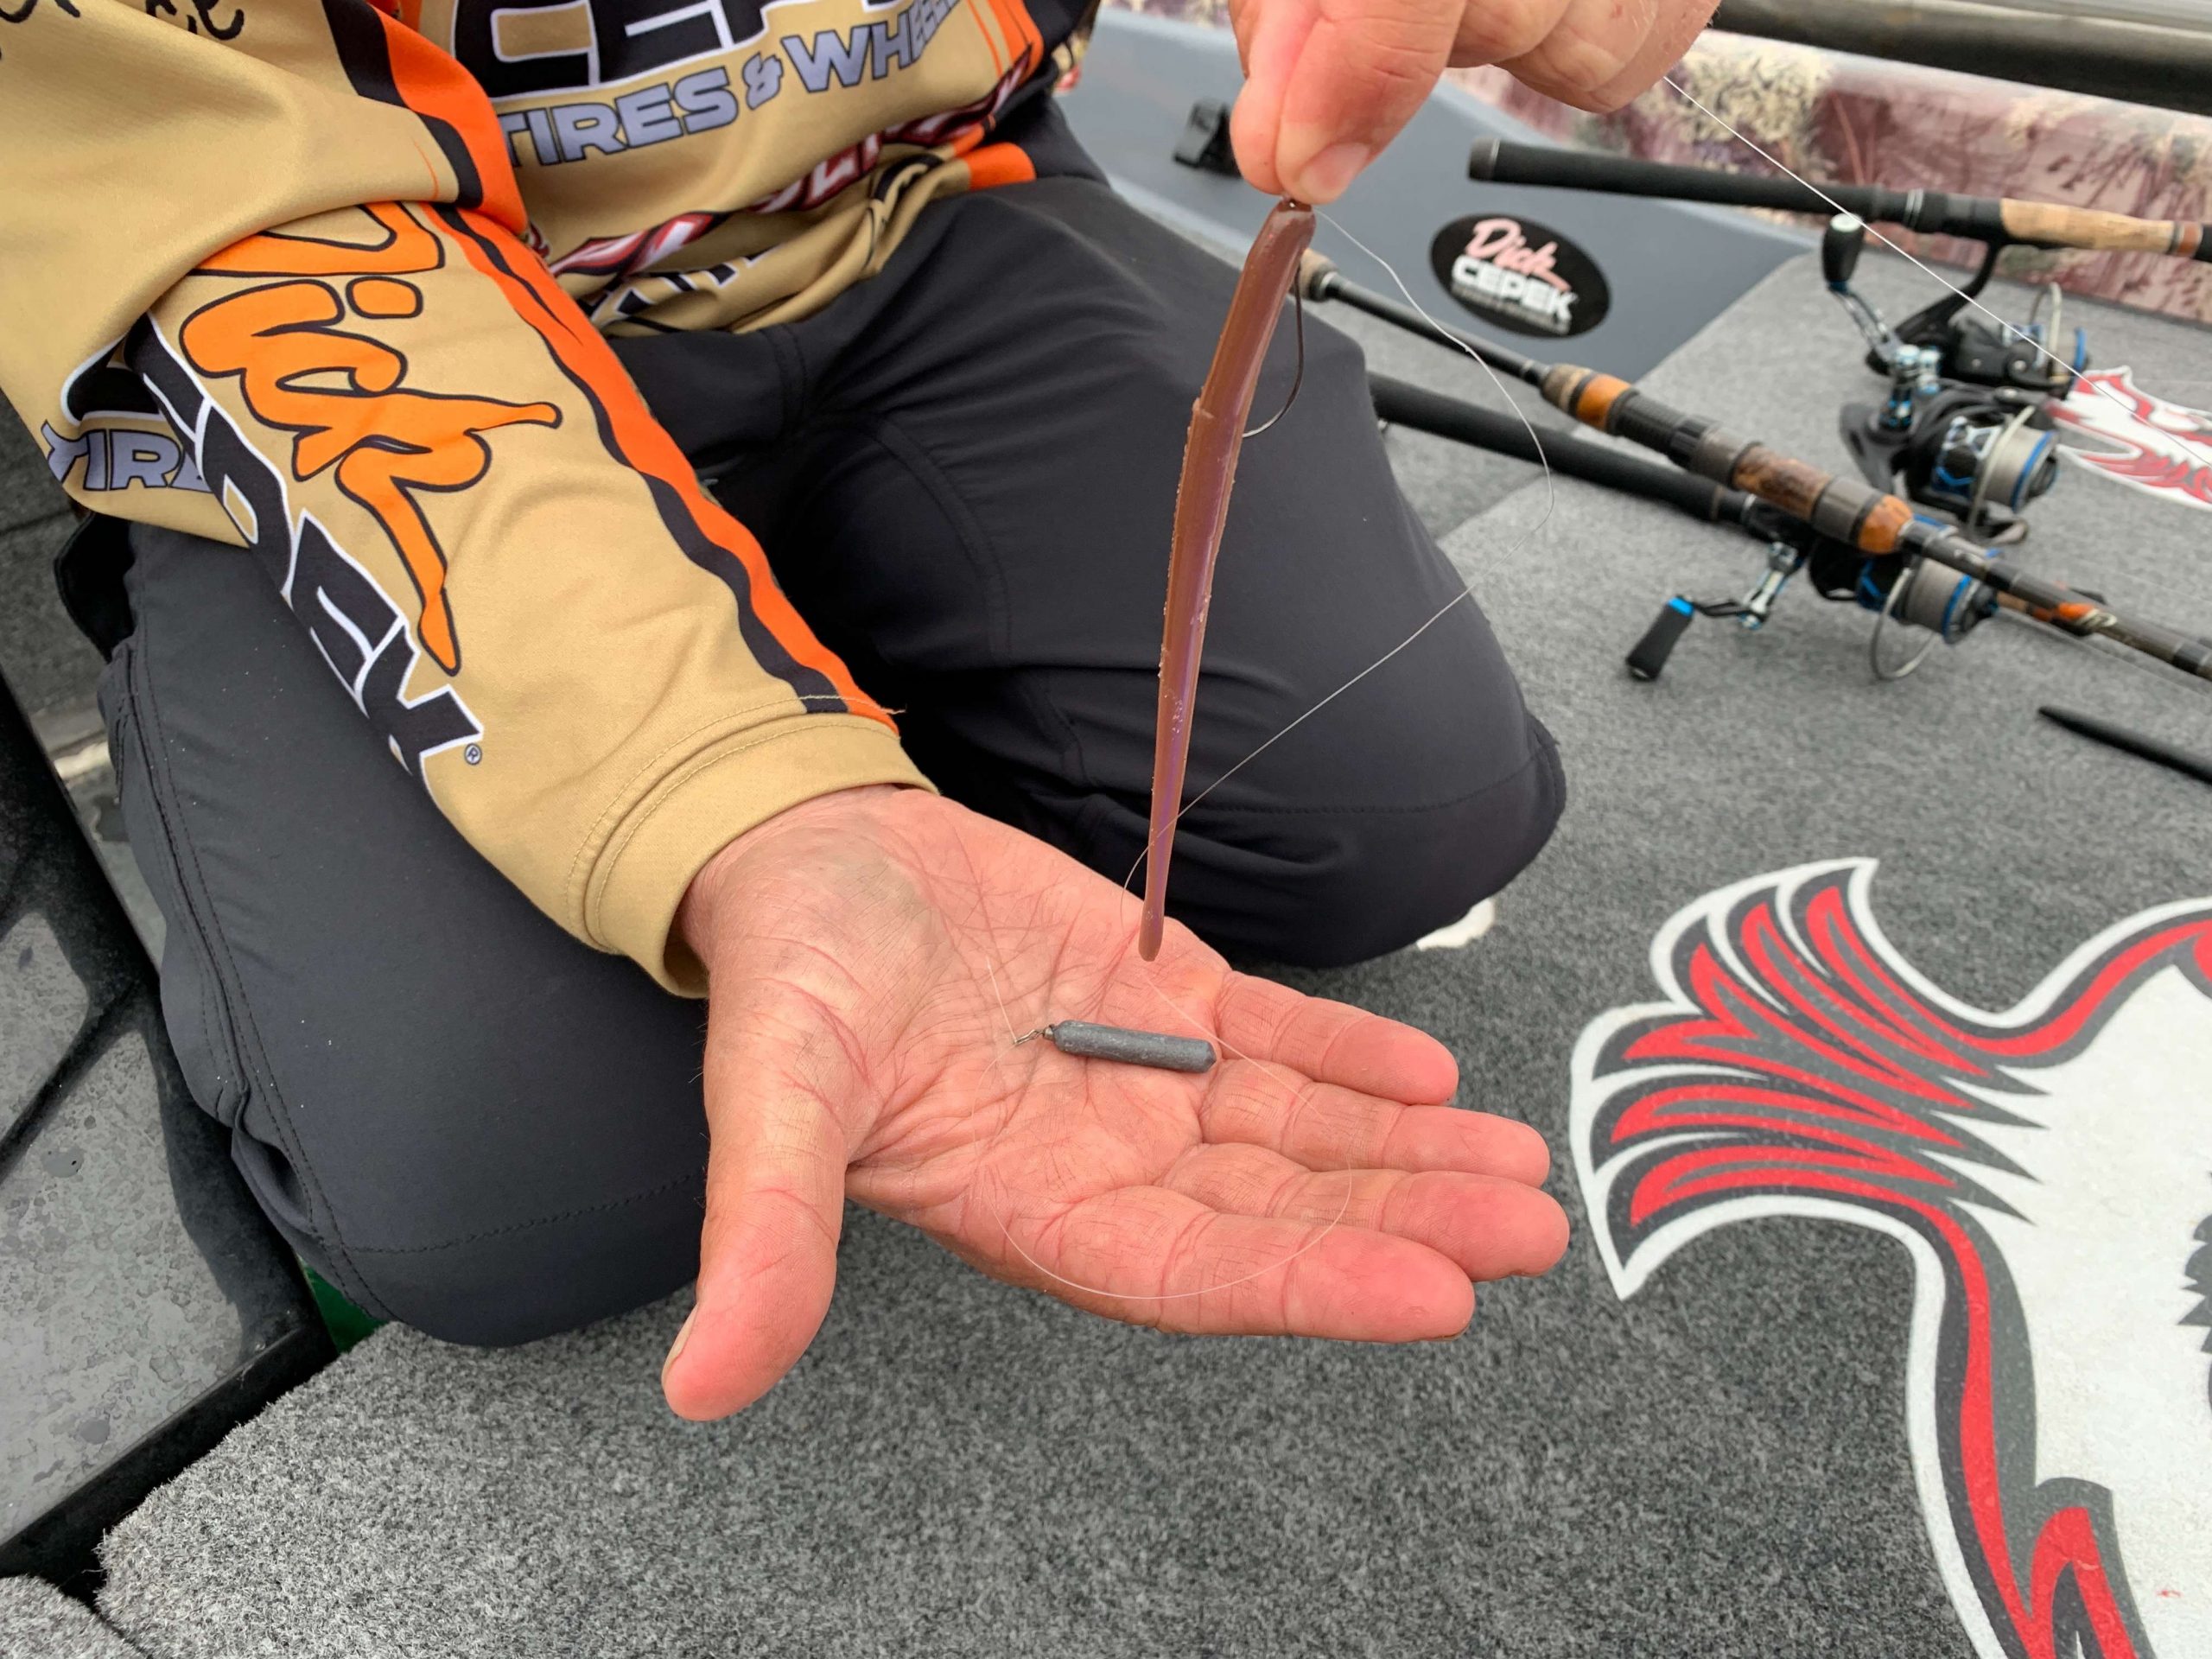 <h4>1. Drop Shot</h4>
Calling this iconic rig his number one go-to, Pirch said heâll employ a dropshot â usually with a 4 1/2- to 6-inch finesse worm â mostly for target-oriented fishing. However, heâs confident in the dropshotâs ability to earn tough bites, especially when heavy fishing pressure squeezes down the opportunity level.
<BR><BR>
âThe nice thing is you can rig it Texas style for fishing around cover, or with a nose hook or wacky style for open water,â he said. âIt just depends on where youâre fishing.â
<BR><BR>
As for leader length, Pirch says this: âI keep it simple, but if your line is leaning at an angle on a long cast, you can go longer on the leader to keep bait off bottom. Also when you want to present your bait above cover, a longer leader can help. Most of the time, you canât go wrong with a 12- to 14-inch dropshot leader.â